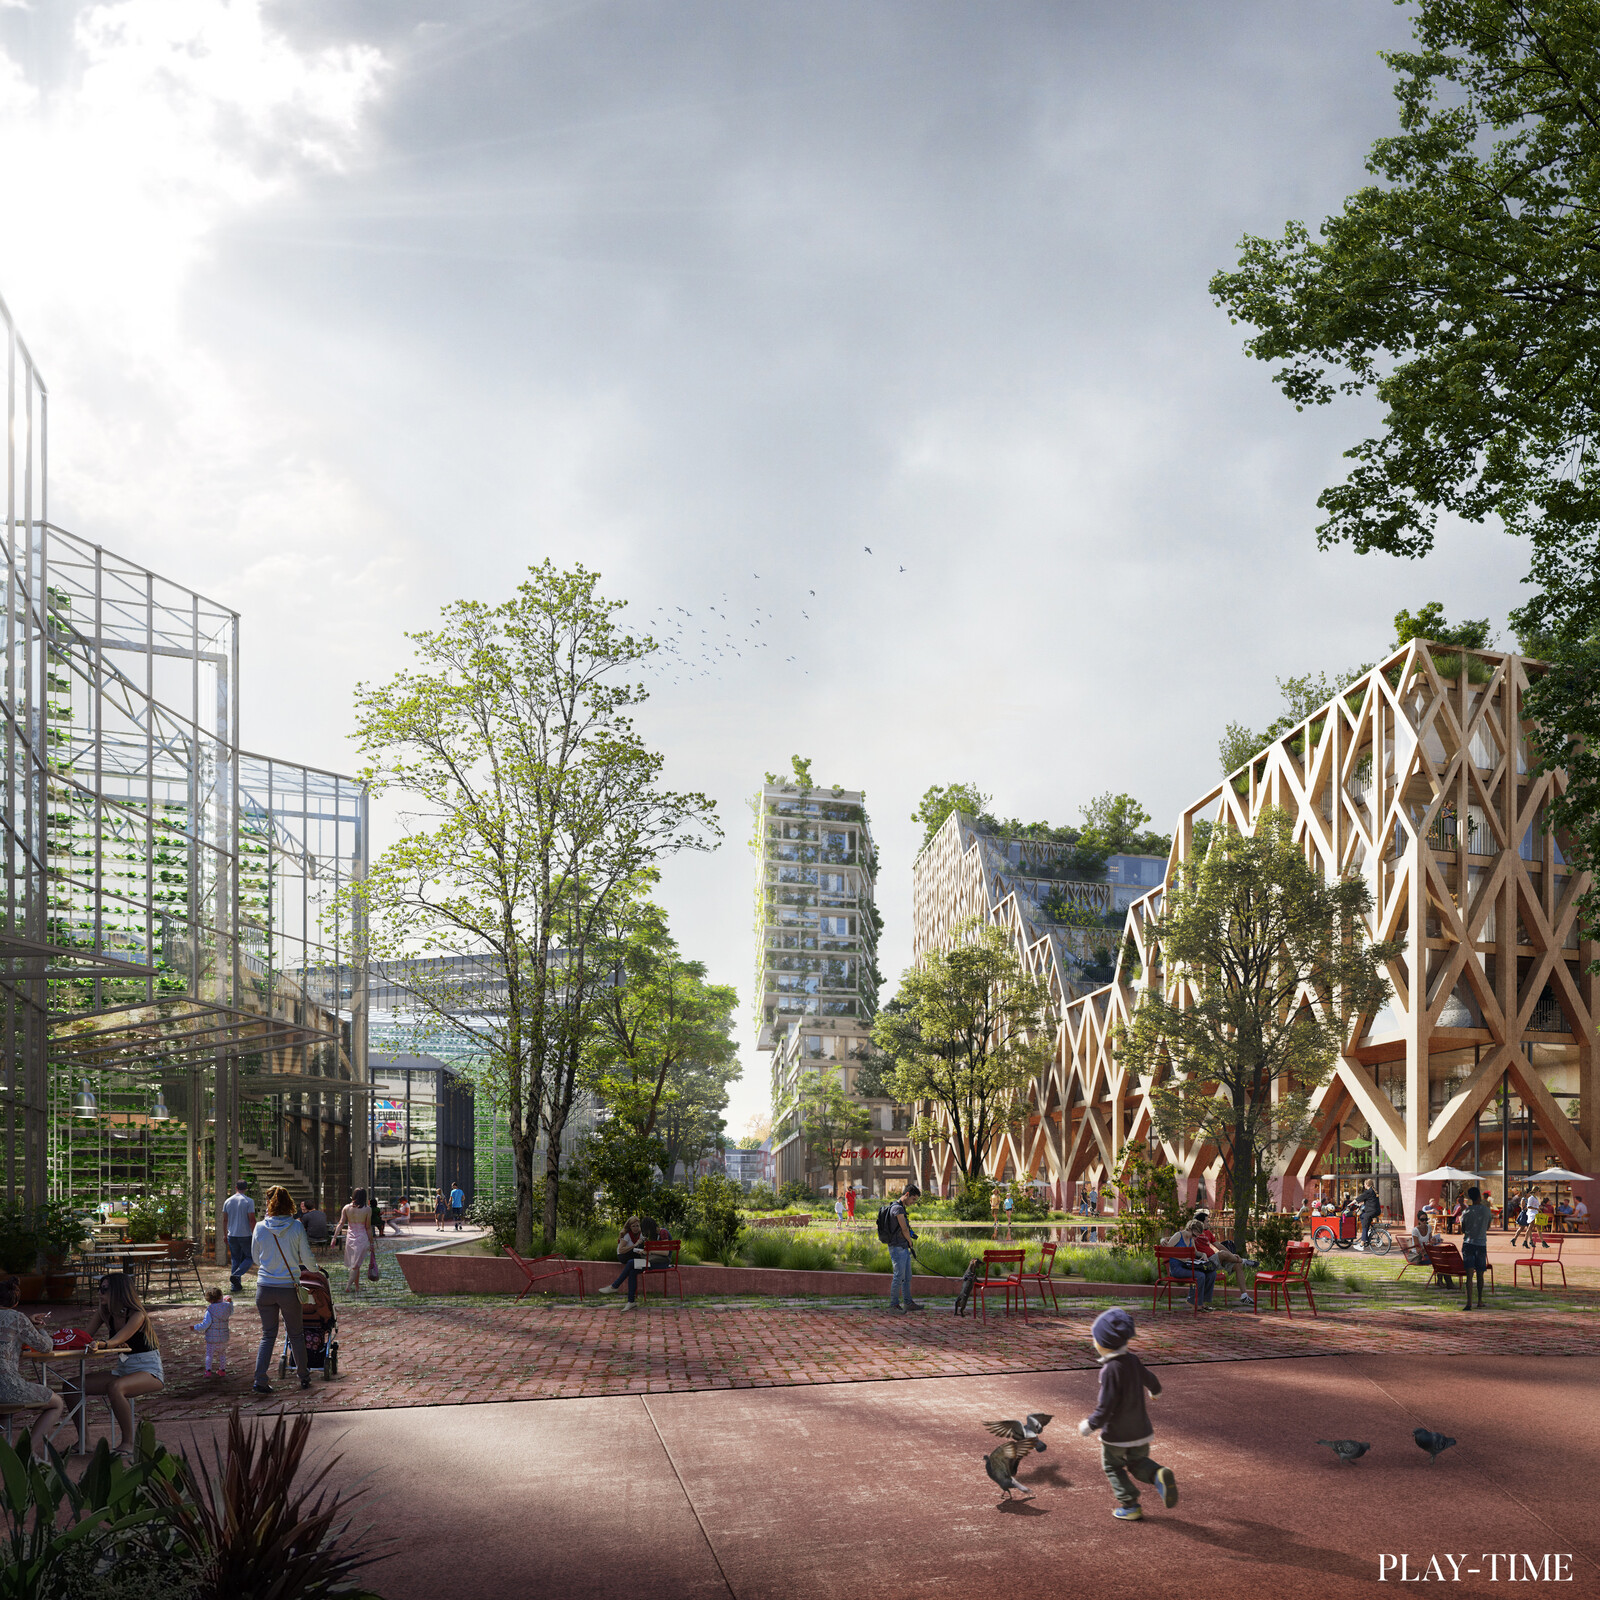 New Metro Campus in Düsseldorf by ACME. Images by PLAY-TIME